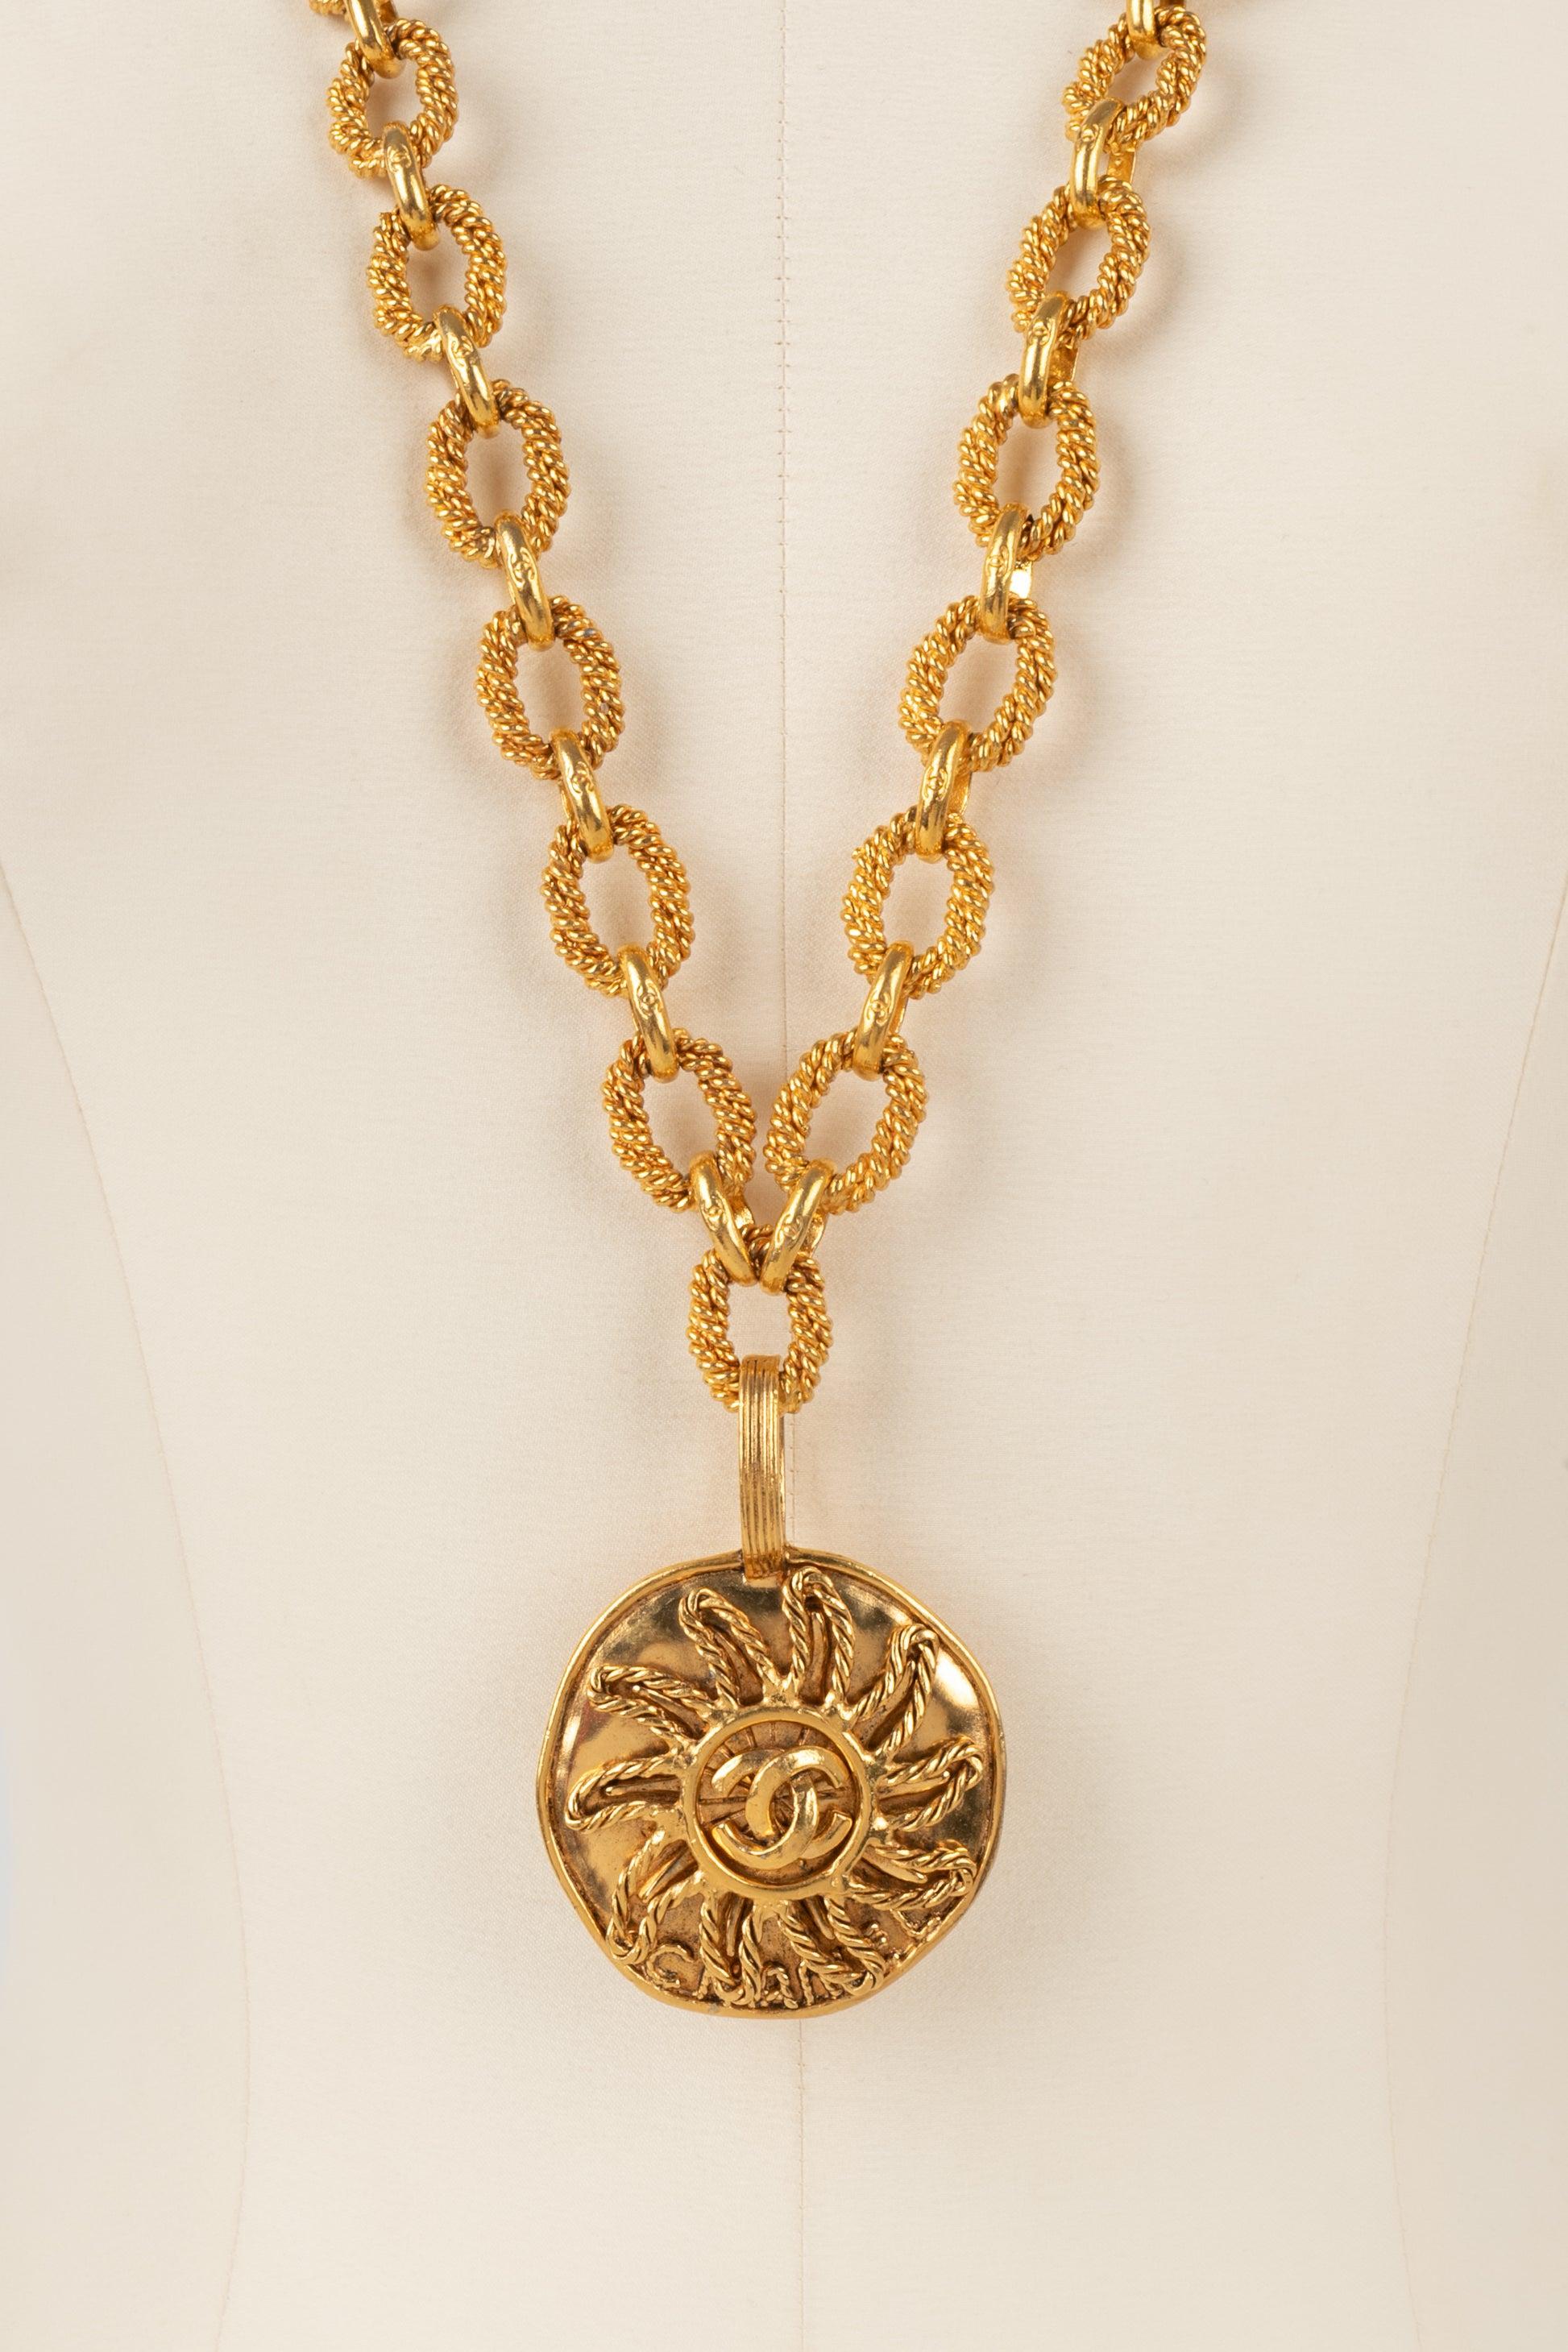 Chanel Golden Metal Necklace with a Sun Pendant, 1993 For Sale 5